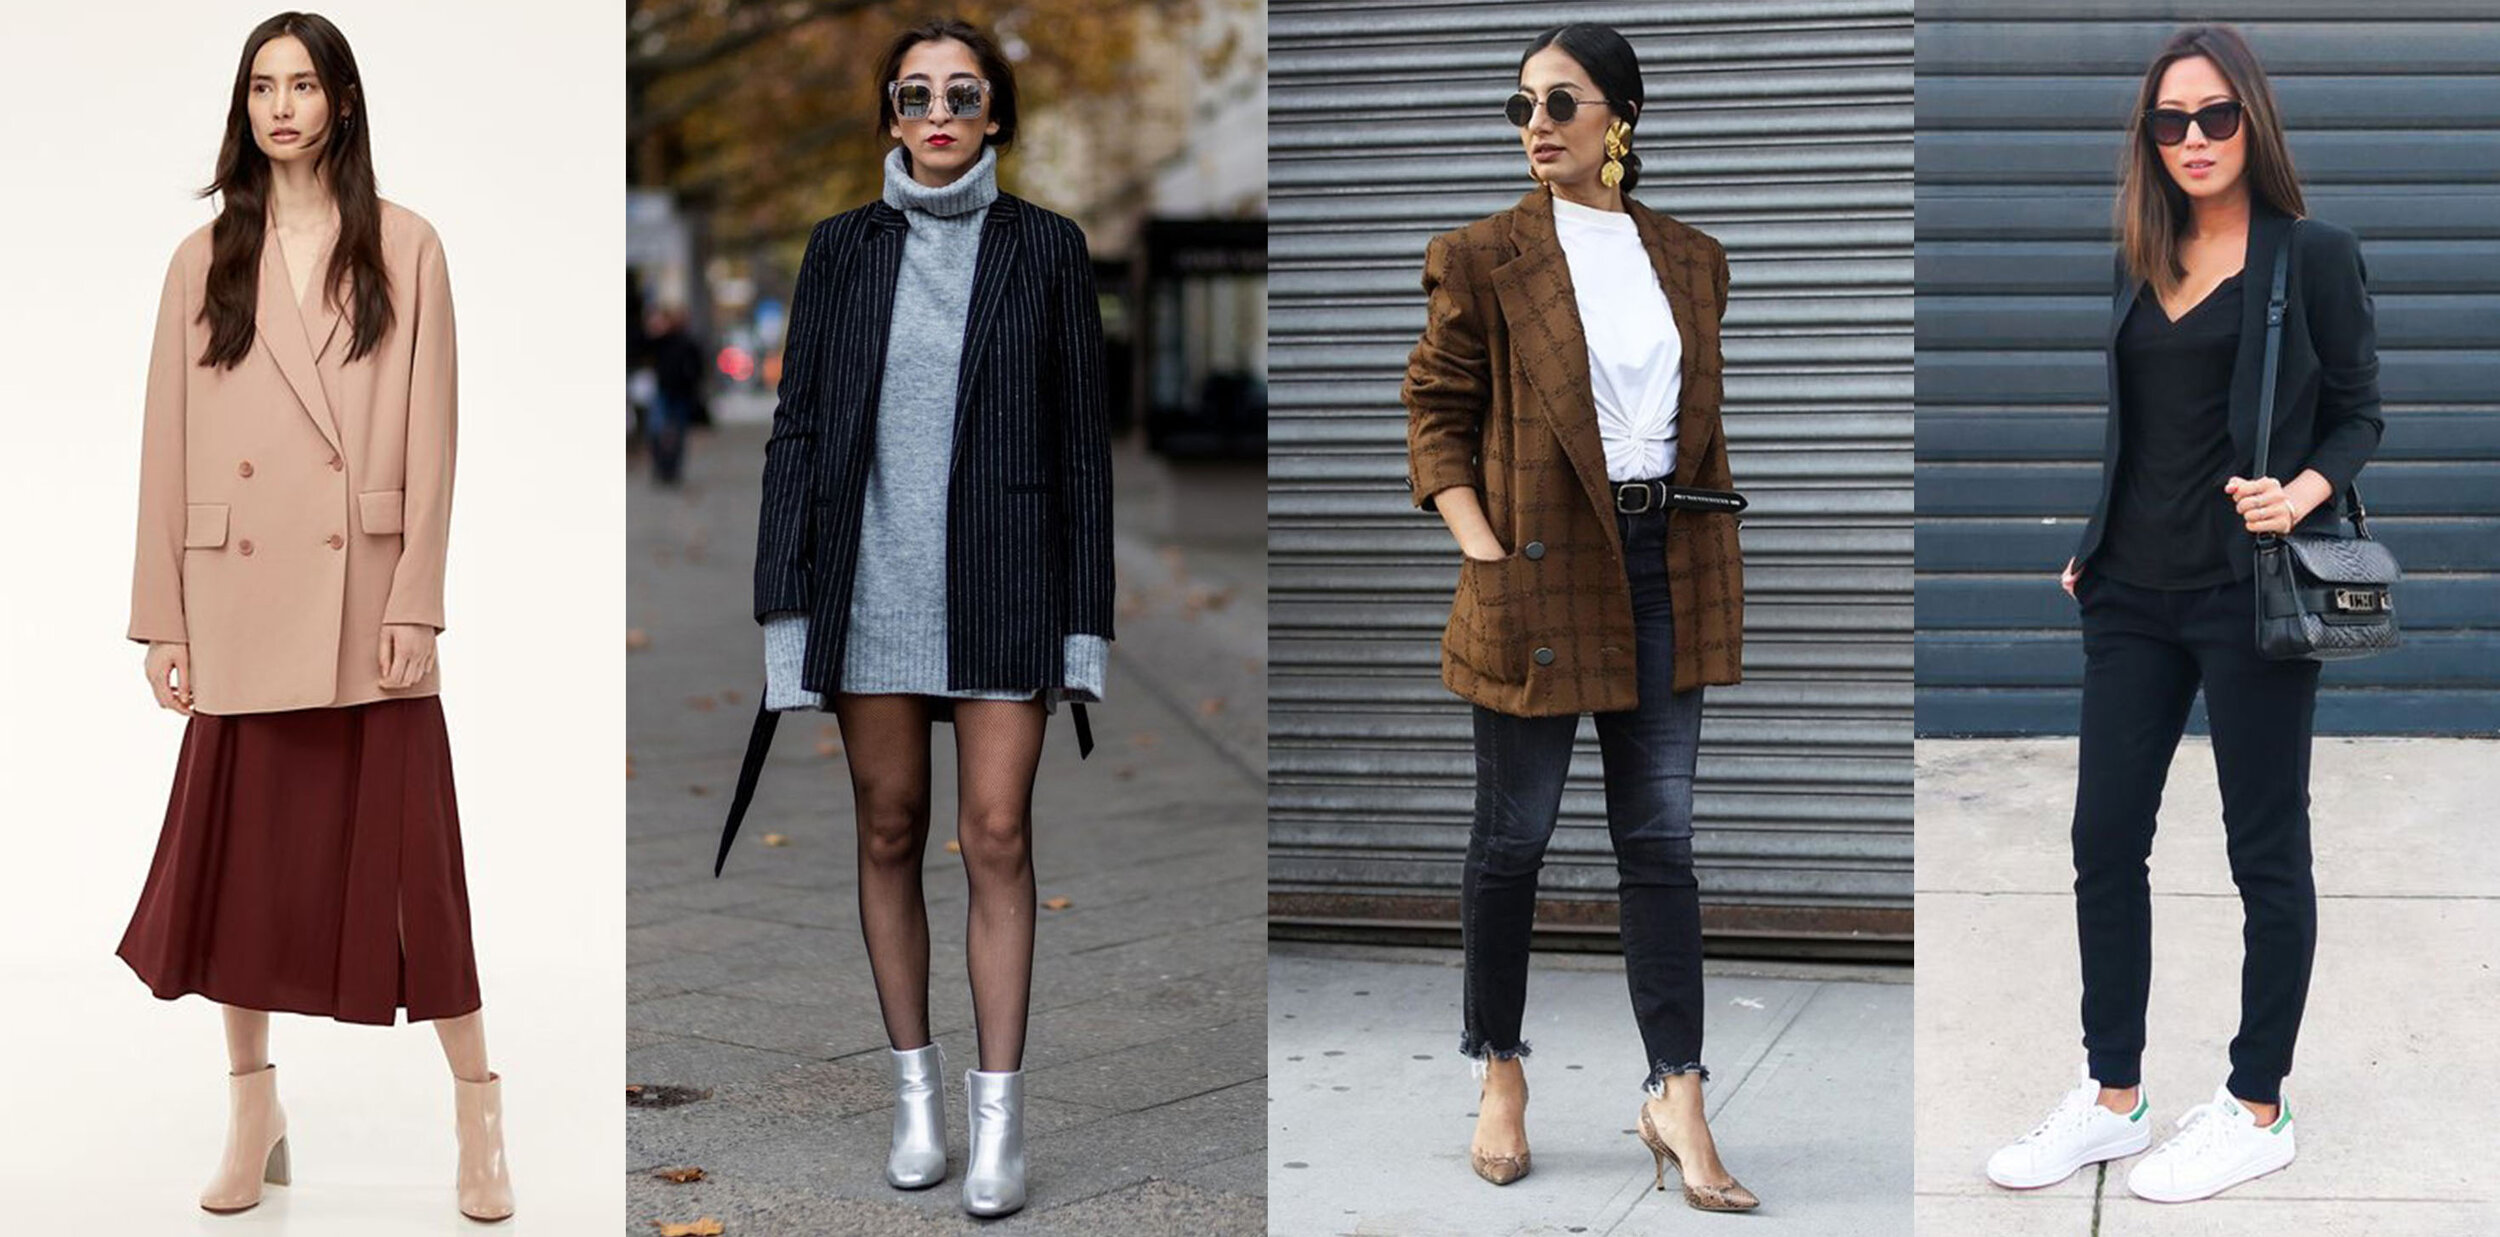 Fall toppers | HOWTOWEAR Fashion